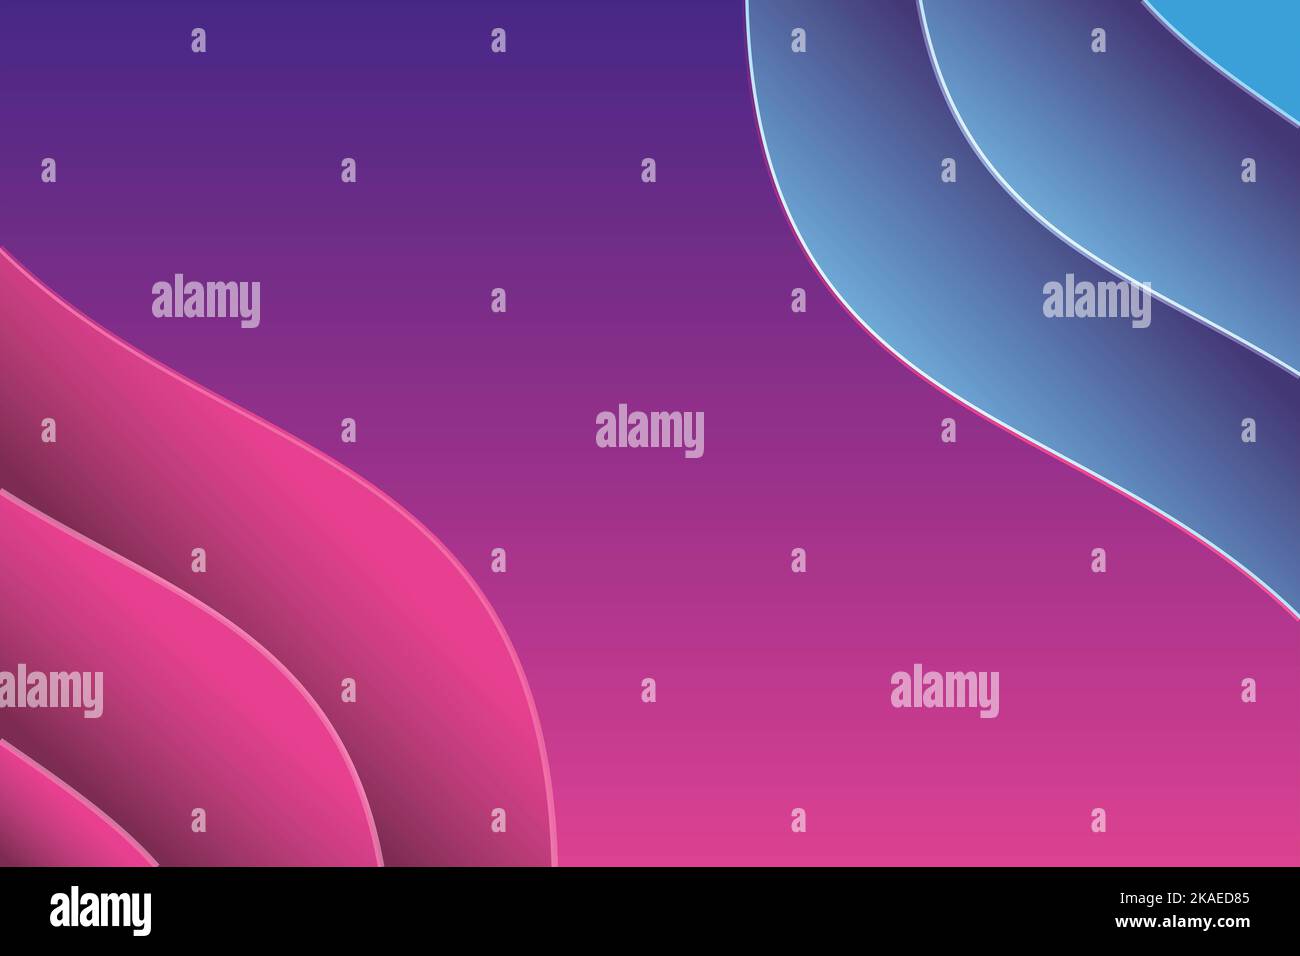 Digital curve lines in blue and pink colors on digital wallpaper design. Stock Photo